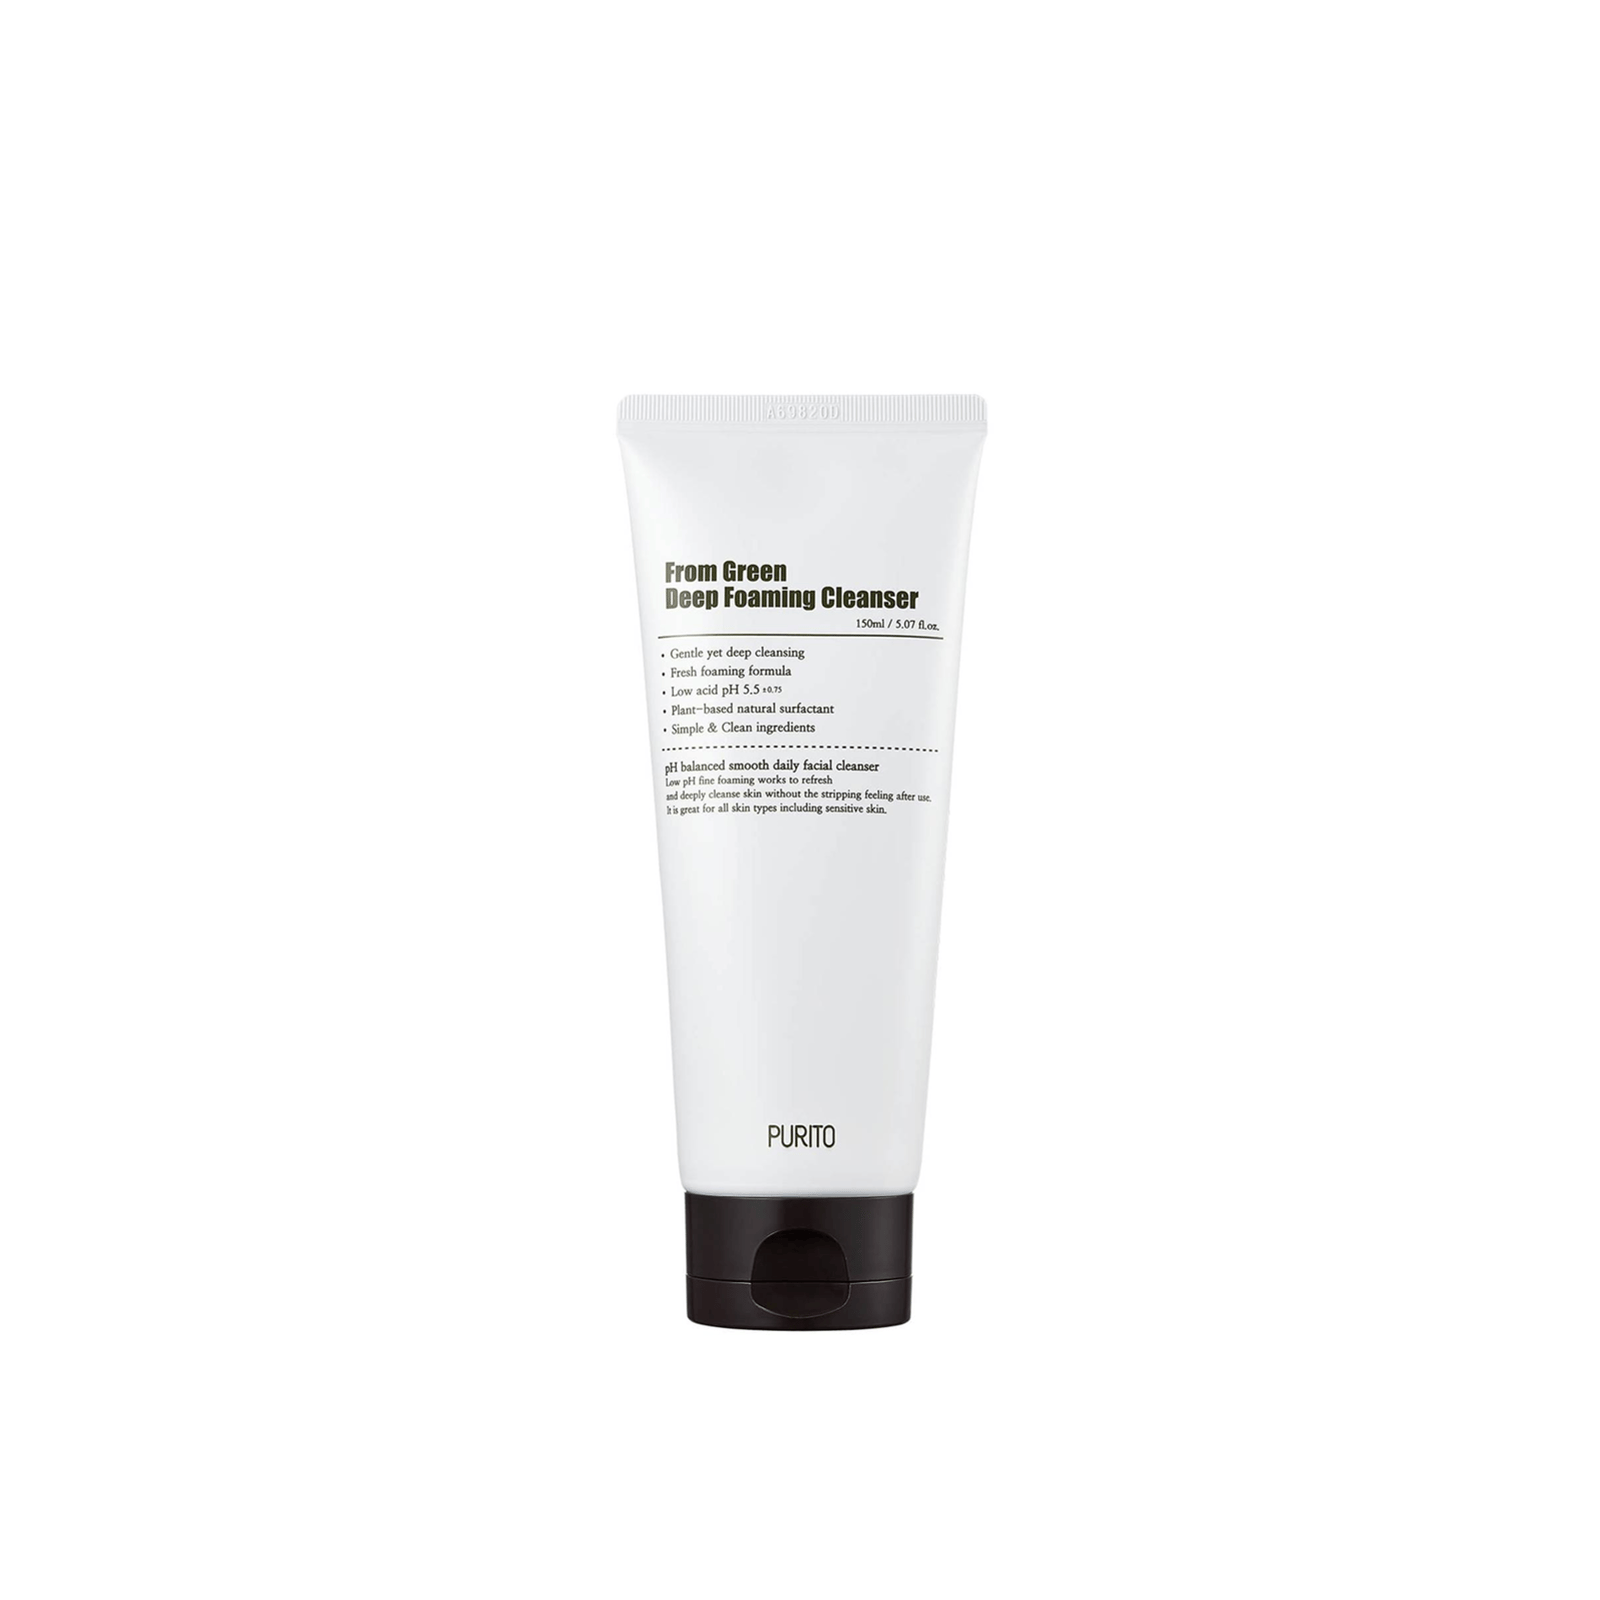 PURITO From Green Deep Foaming Cleanser 150ml